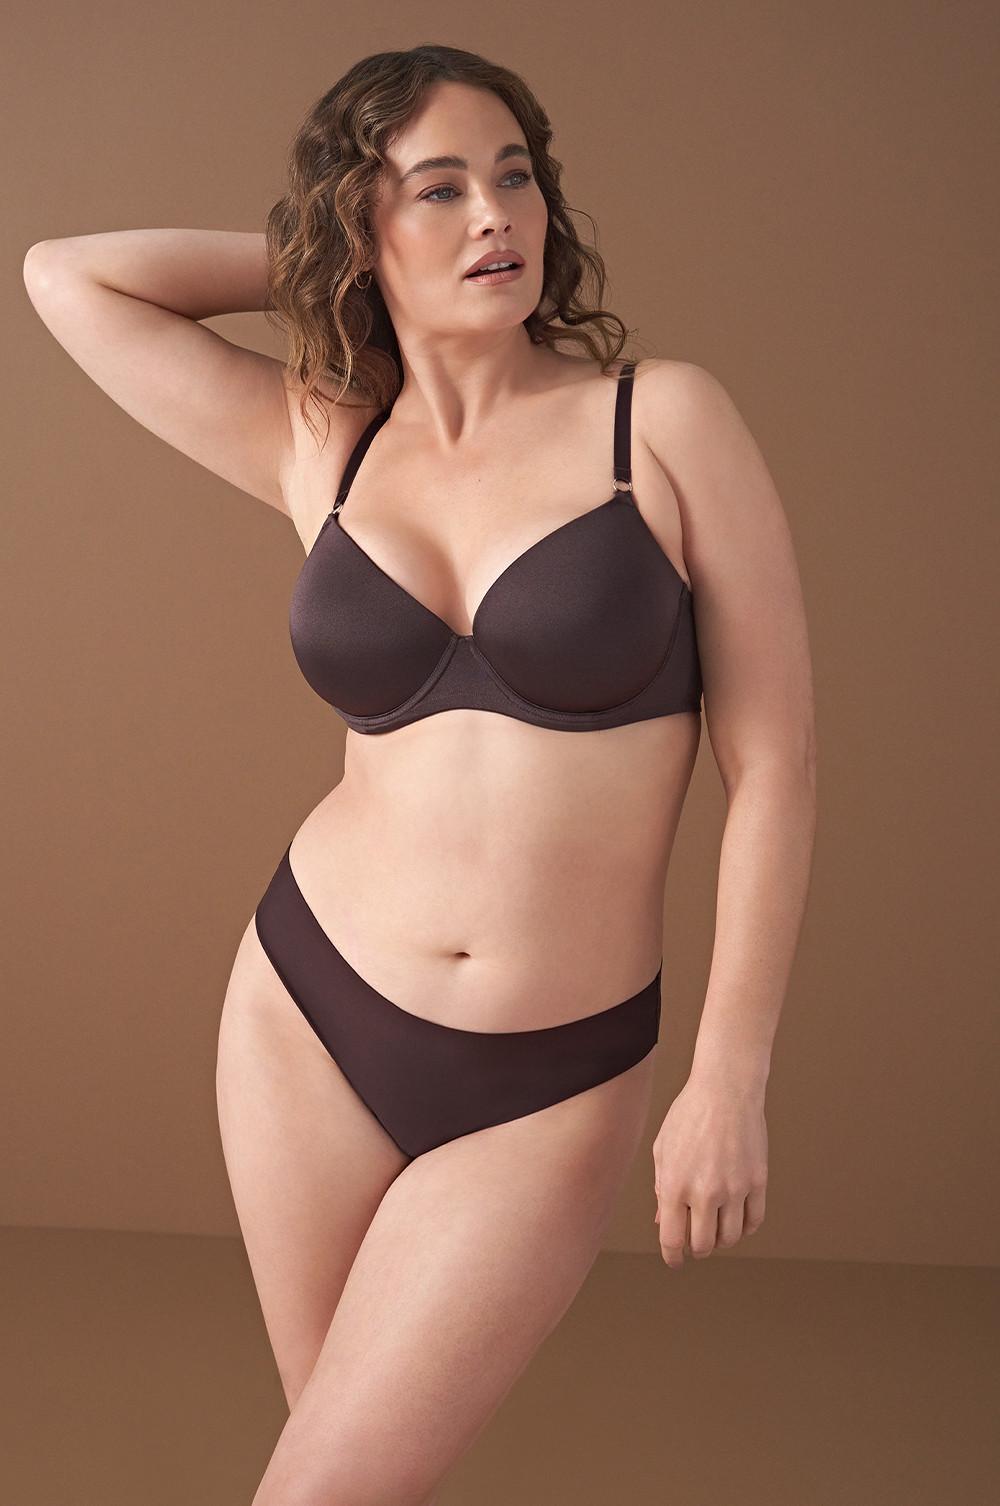 Sizing Chart for Bra Sizes, Panty and Seam Sizes, and Lingerie Sizes